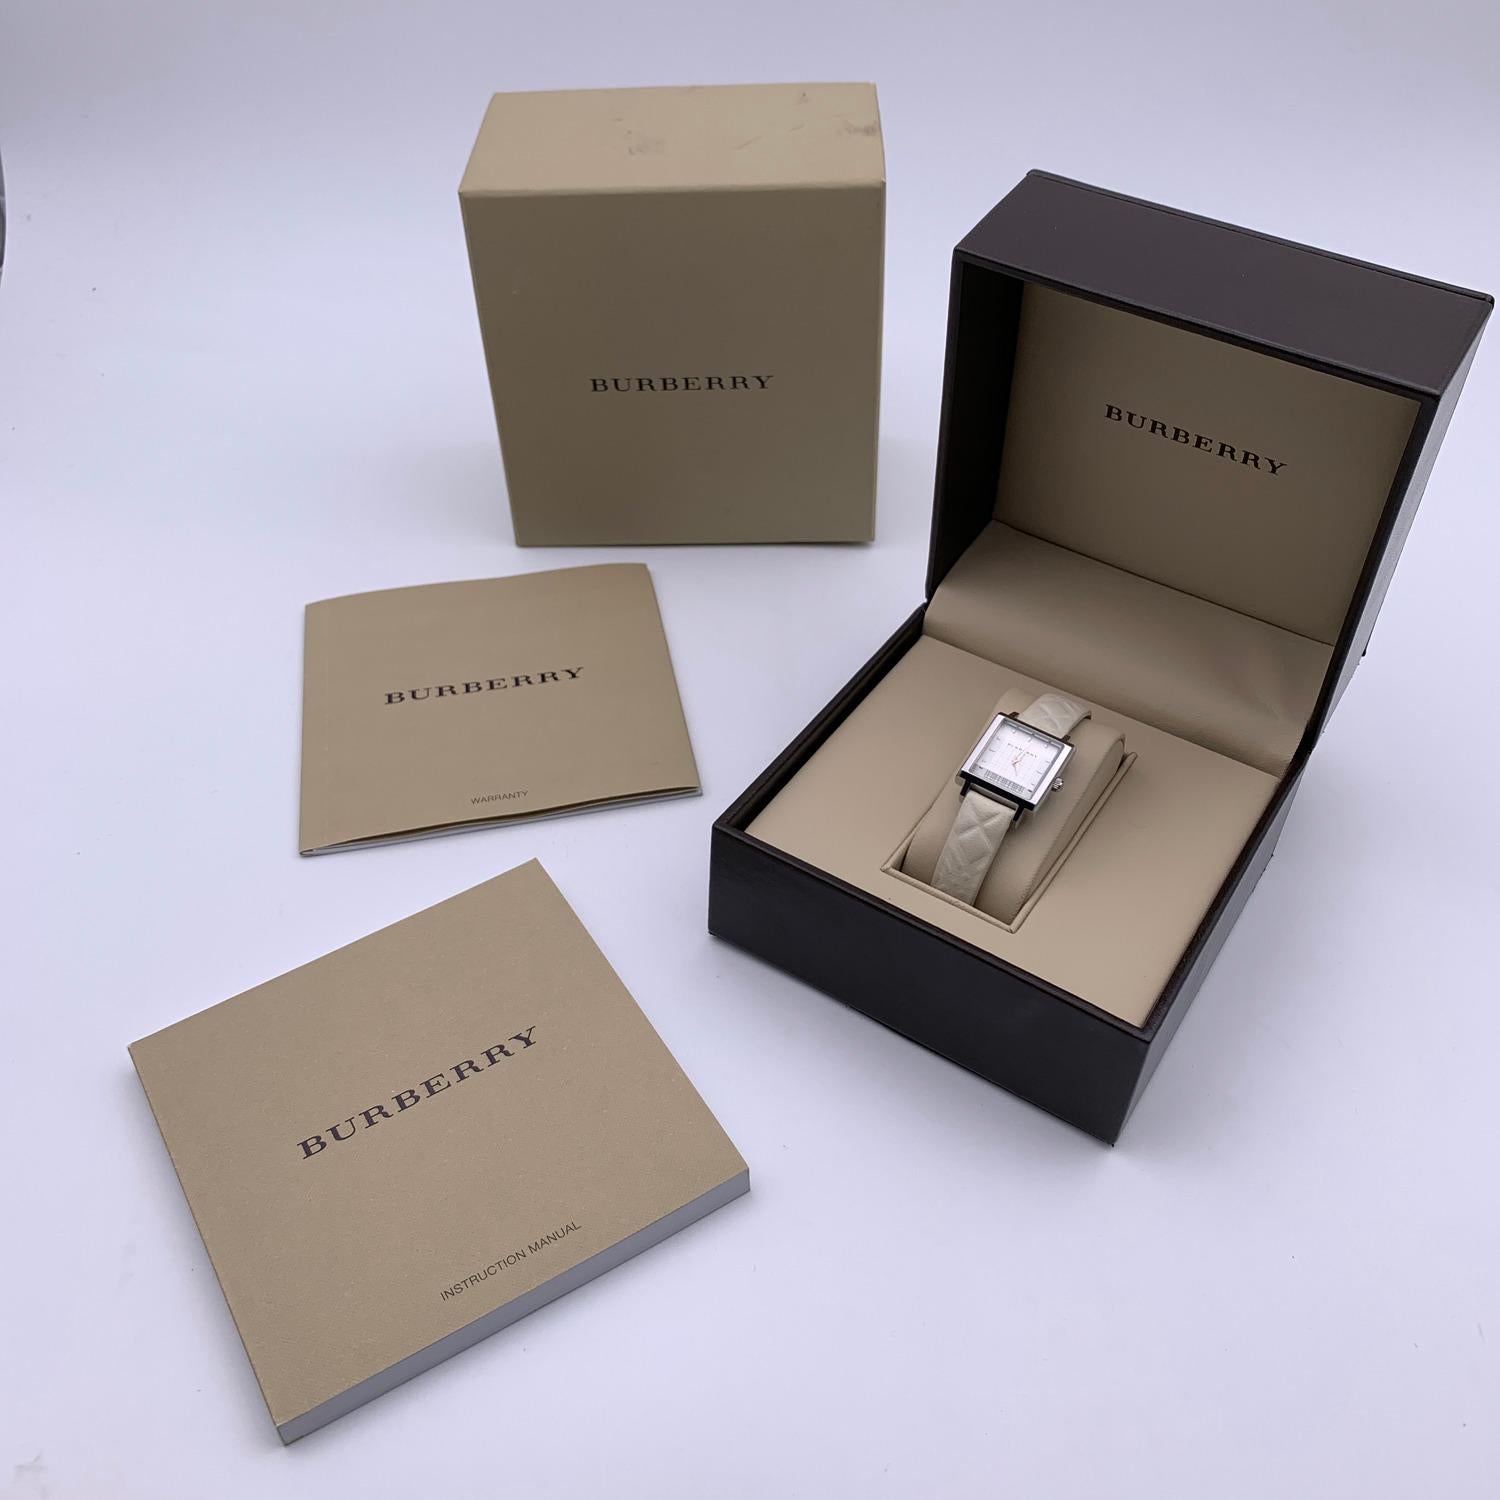 Beautiful Burberry Watch, mod. BU2002. Stainless steel case and white dial. Sapphire scratch resistant crystal. Silver-tone hands. Beige leather wrist strap with buckle closure. 18 holes adjustment. Swiss made quartz movement. Waterproof up to 3